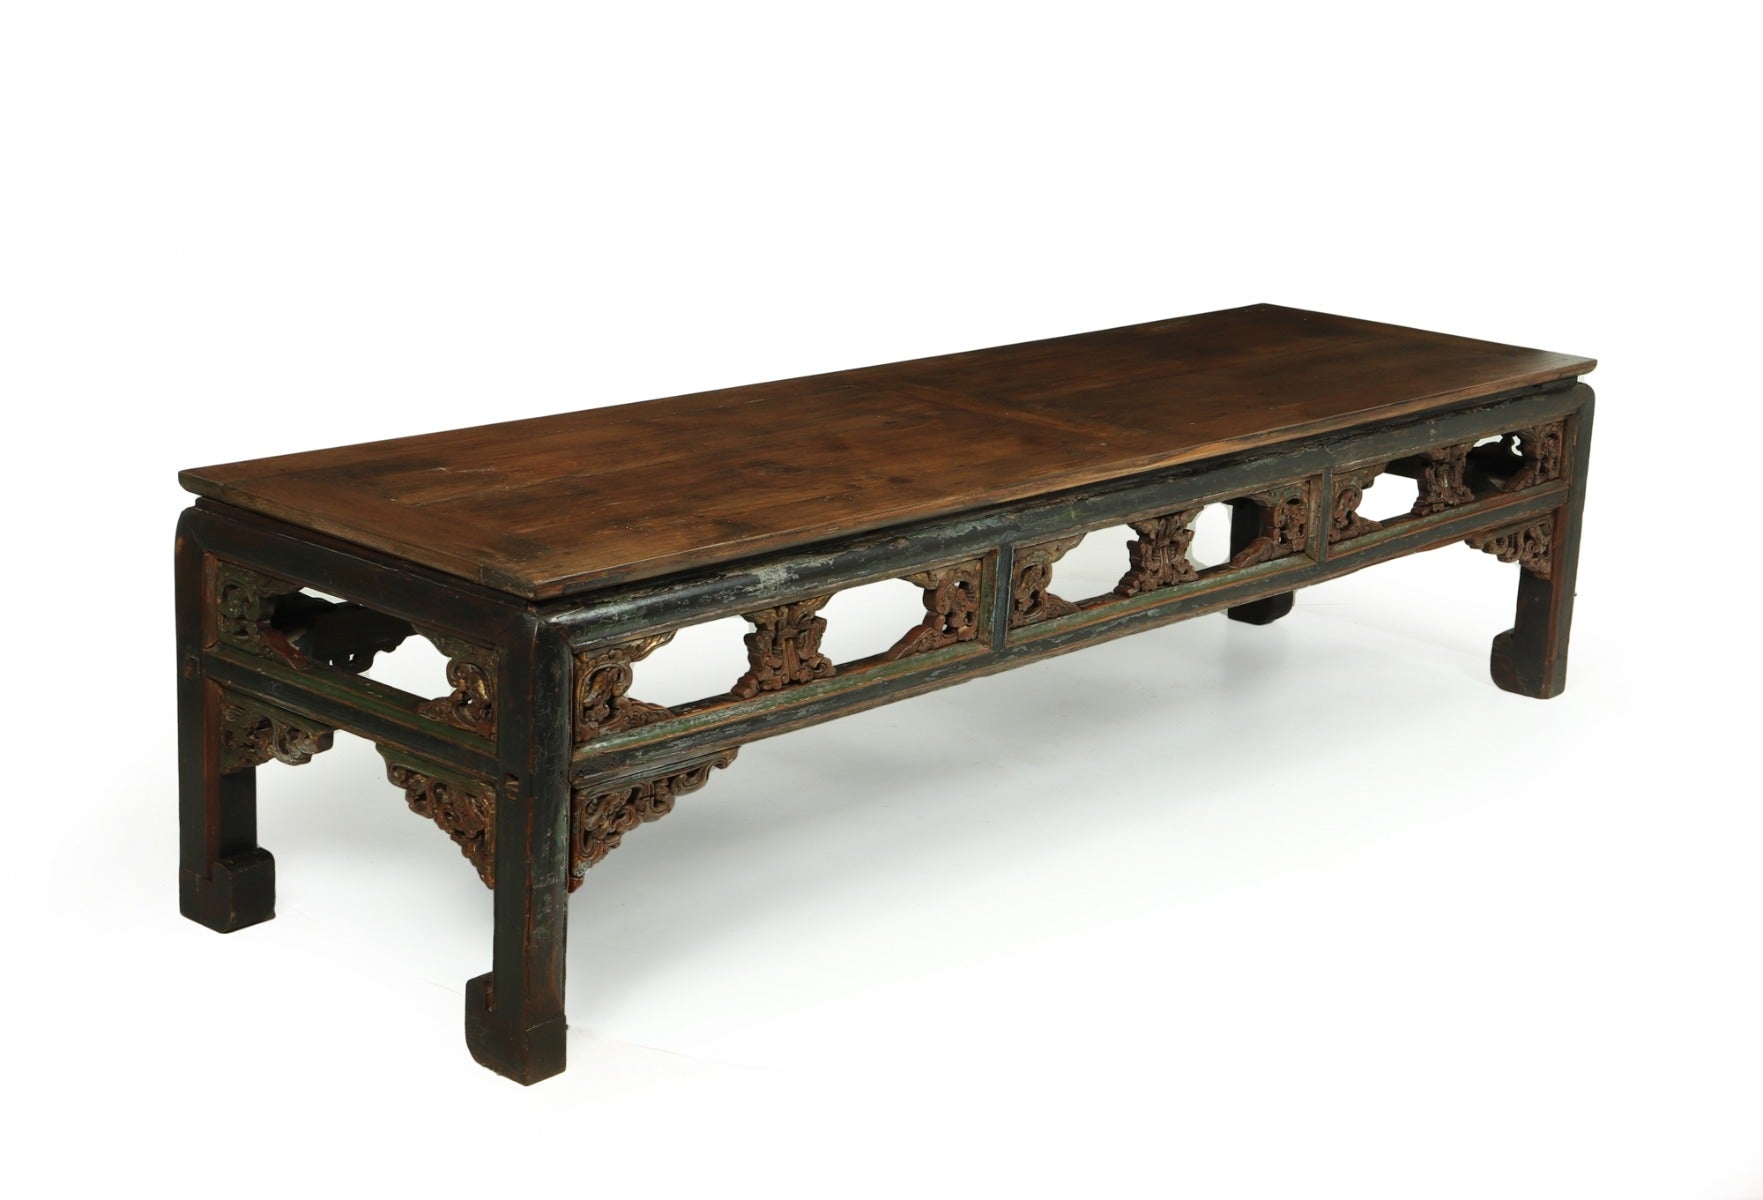 Antique painted Chinese Coffee Table Shanxi – The Furniture Rooms